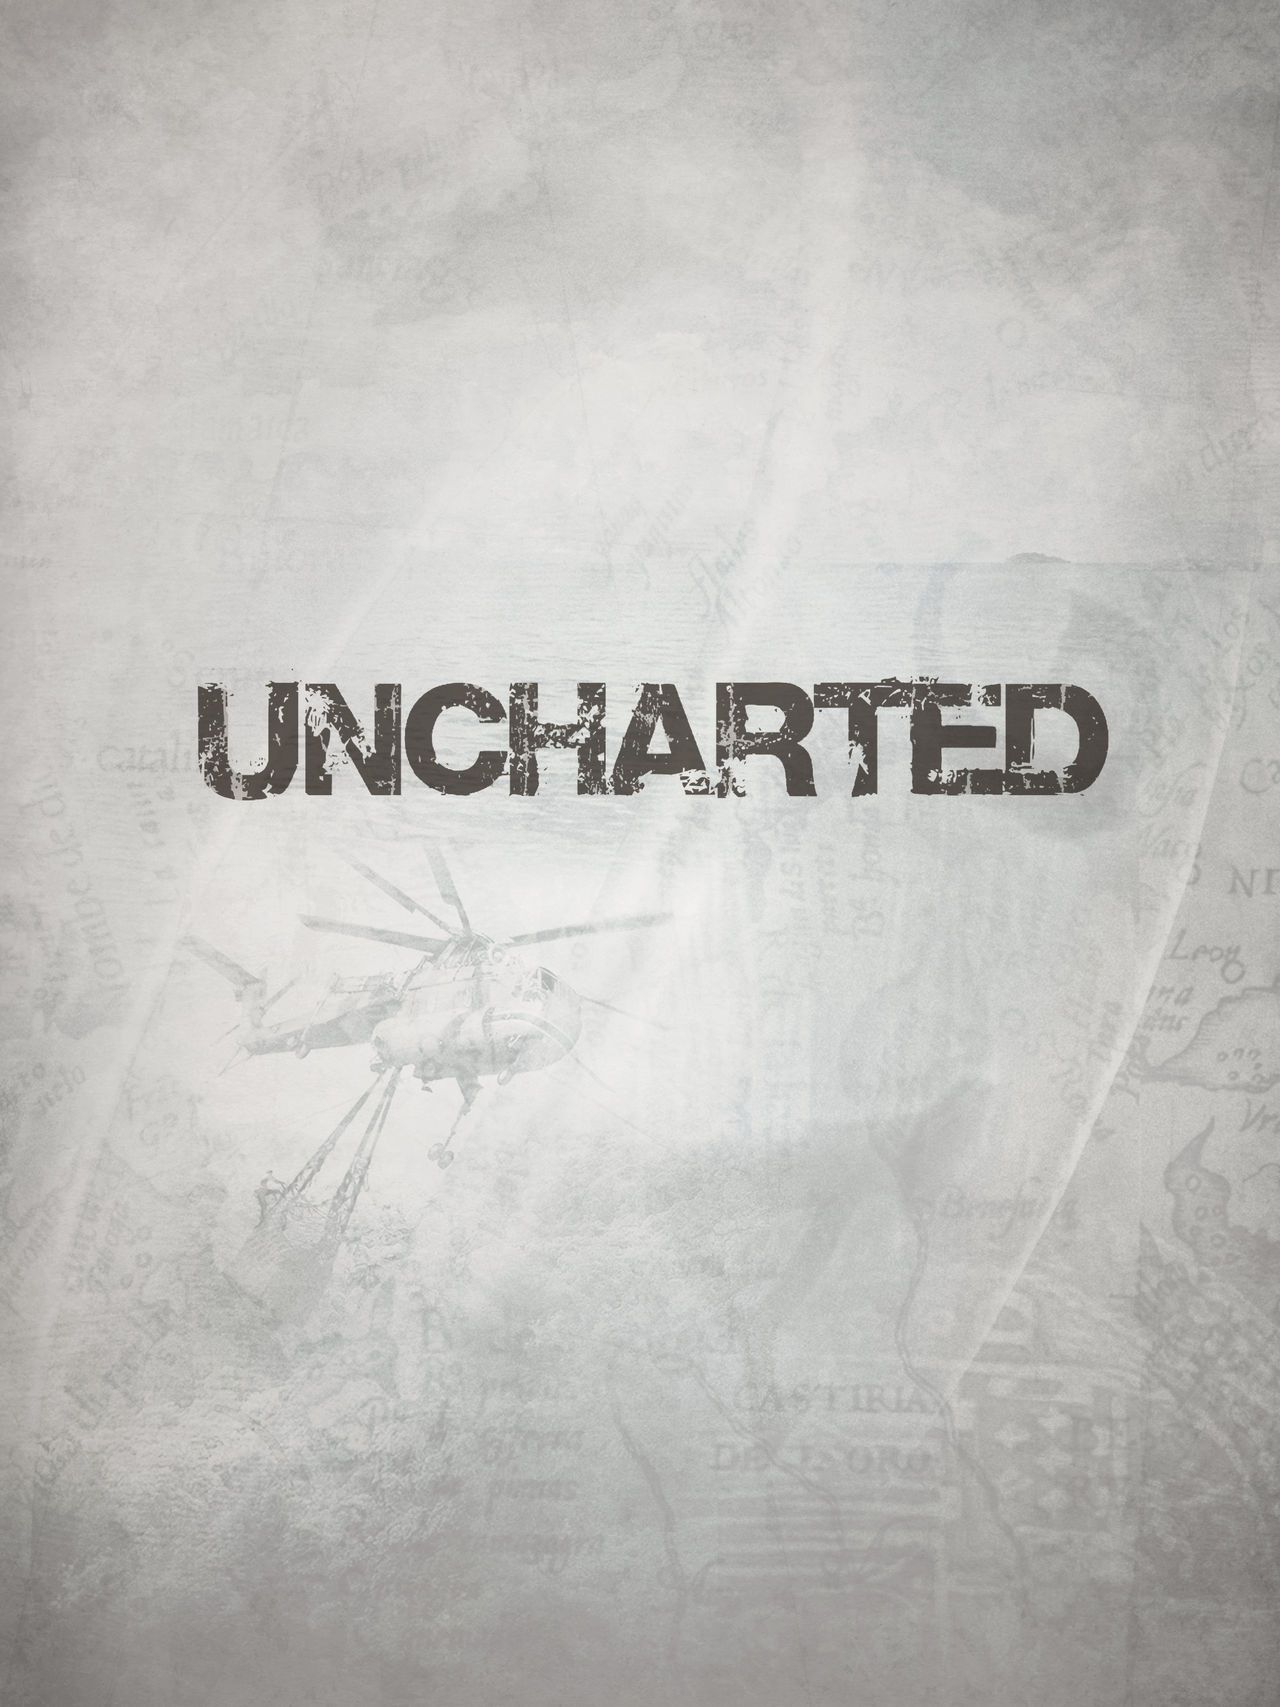 The Art of the Uncharted Trilogy 3